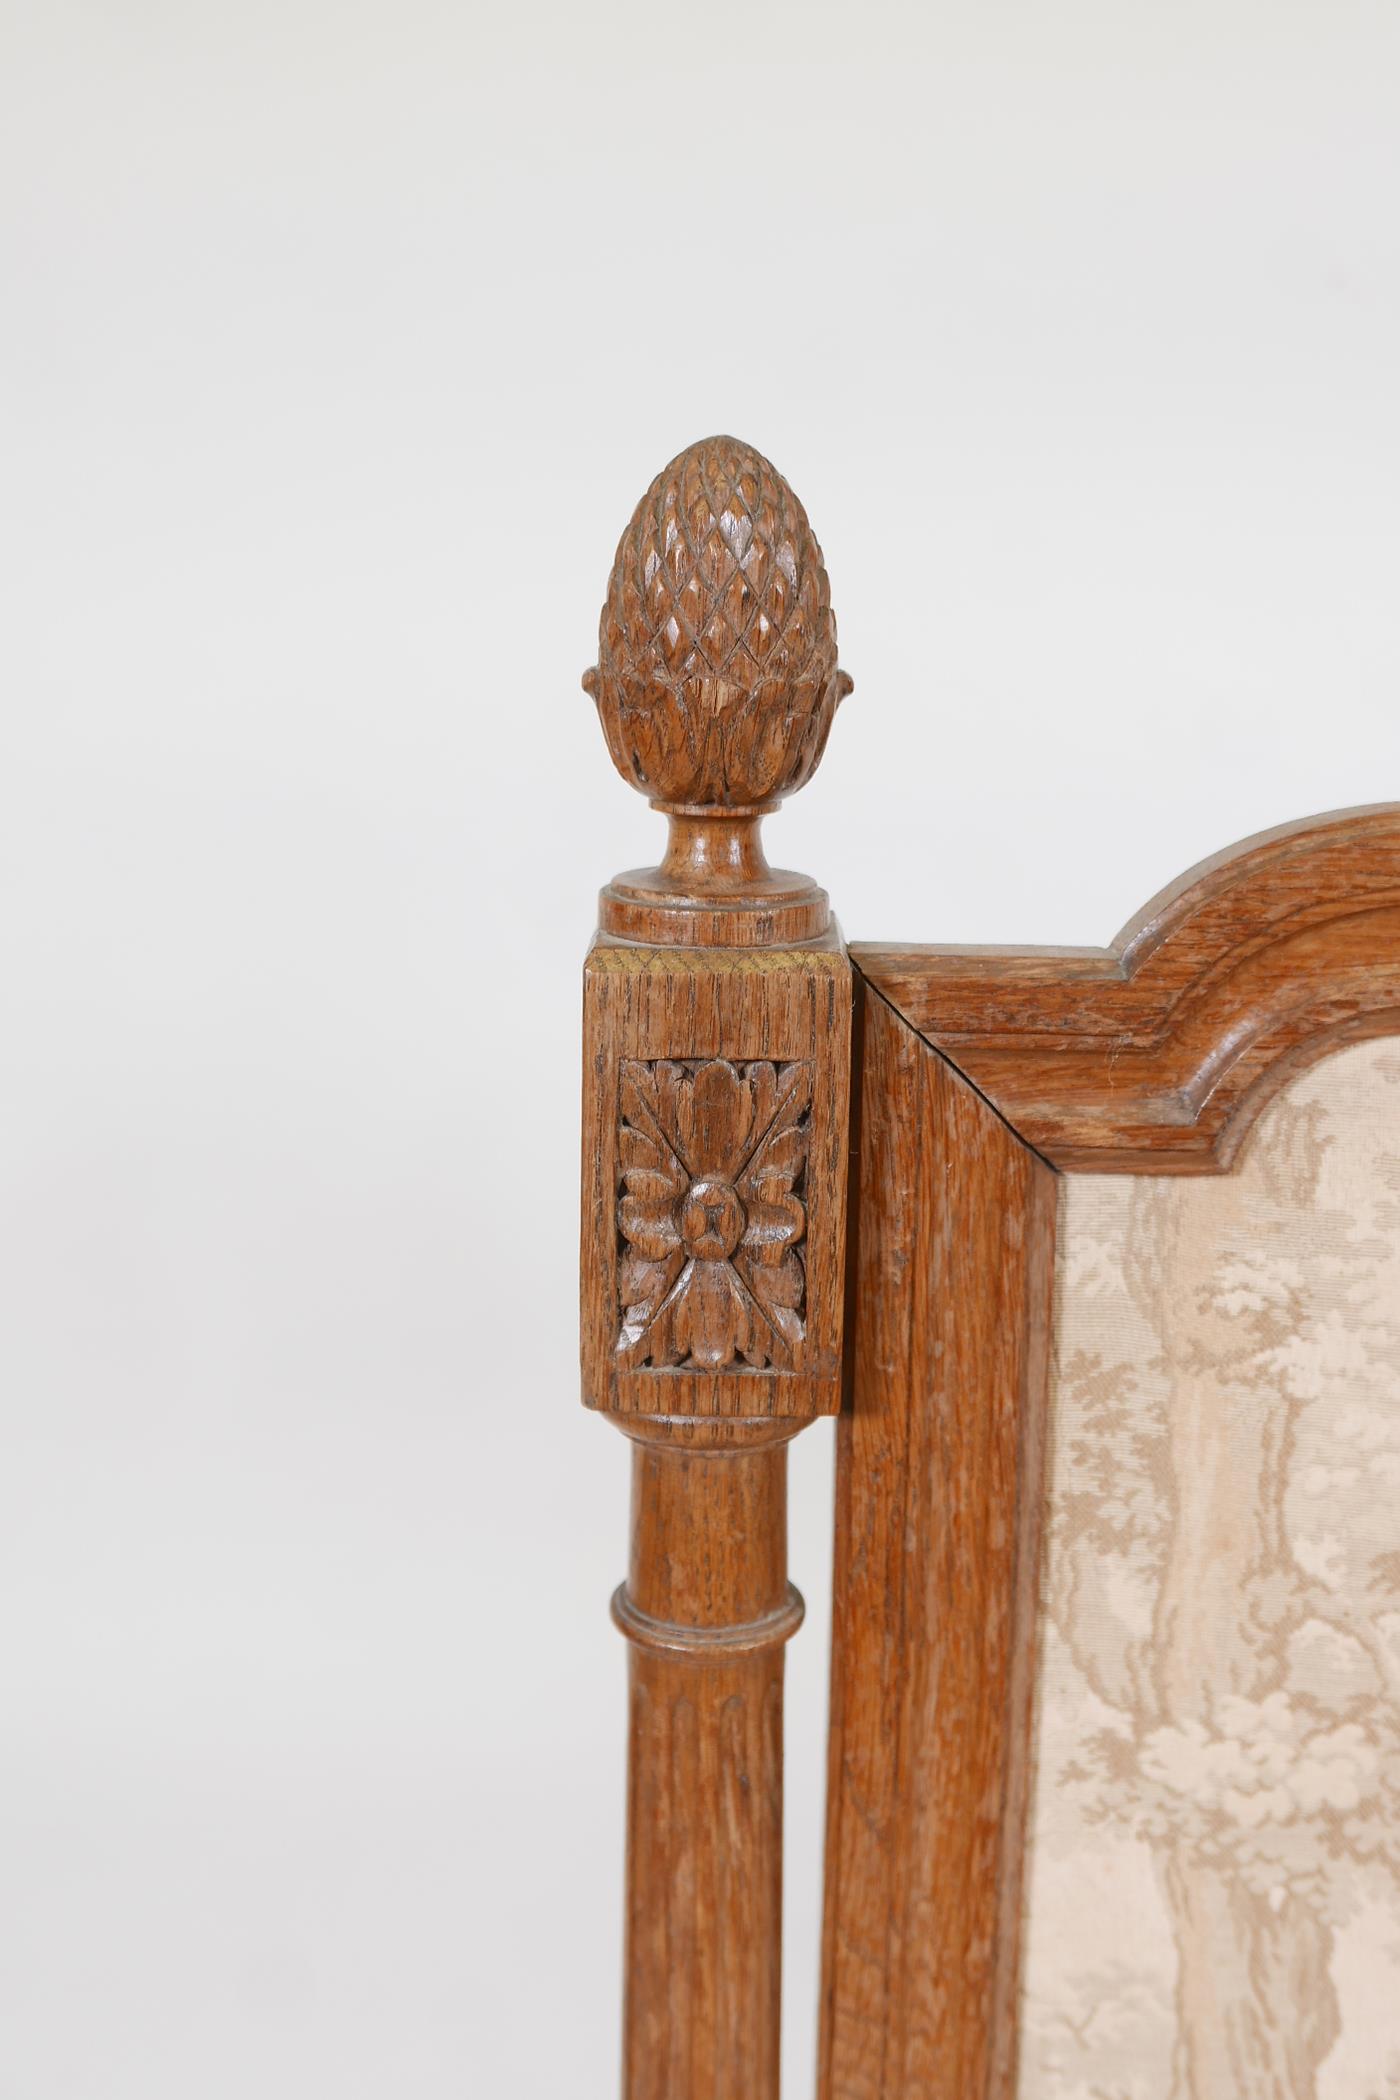 A C19th French carved oak fire screen, with pineapple and patarae decoration and fluted columns - Image 3 of 6